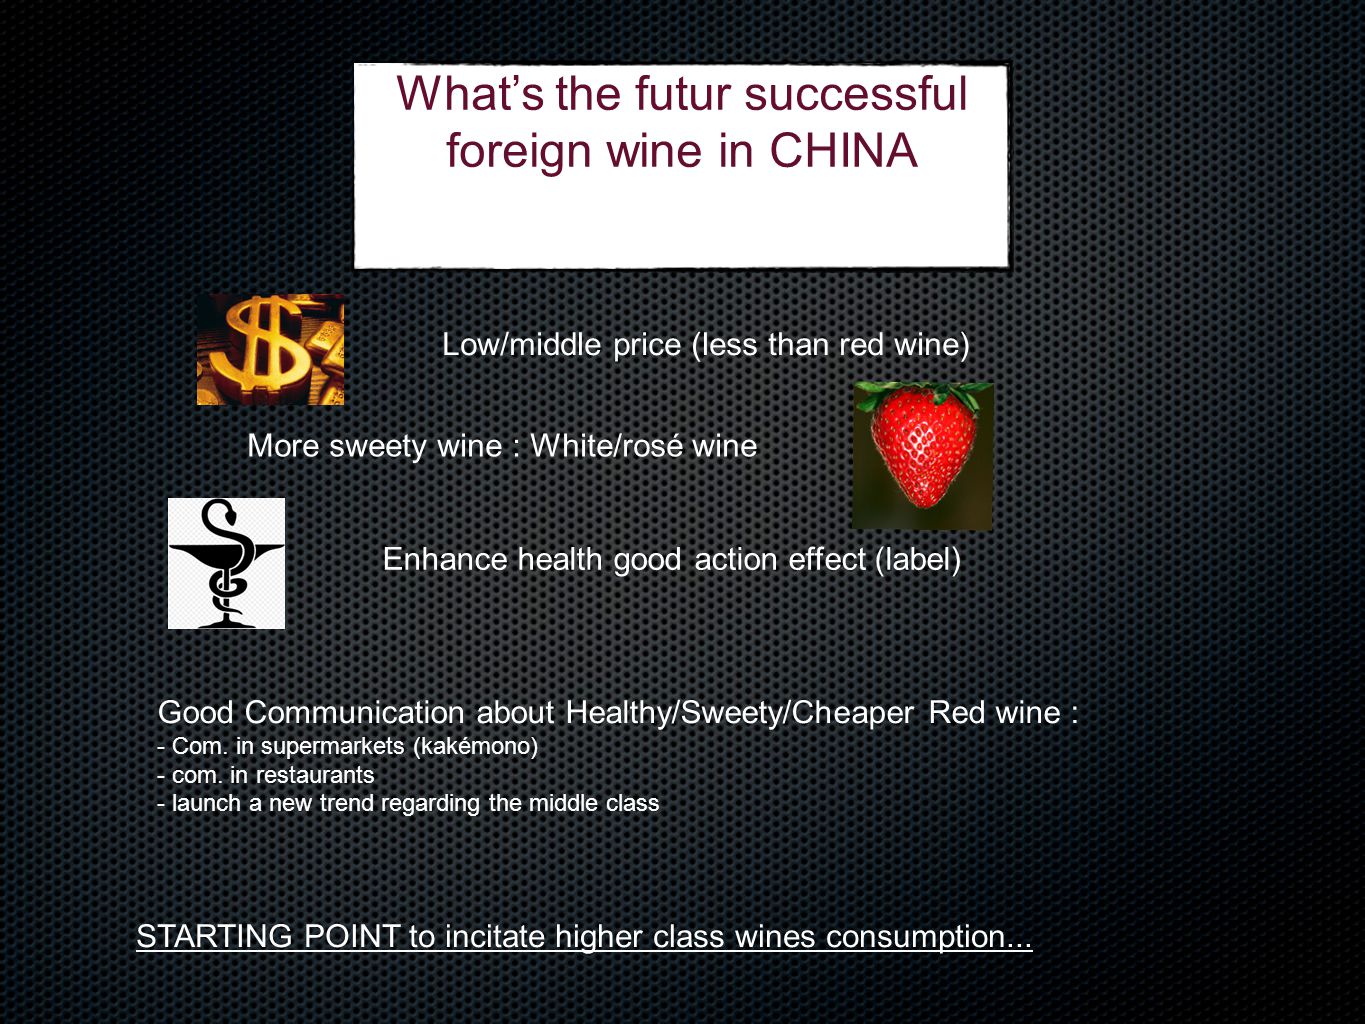 STARTING POINT to incitate higher class wines consumption...